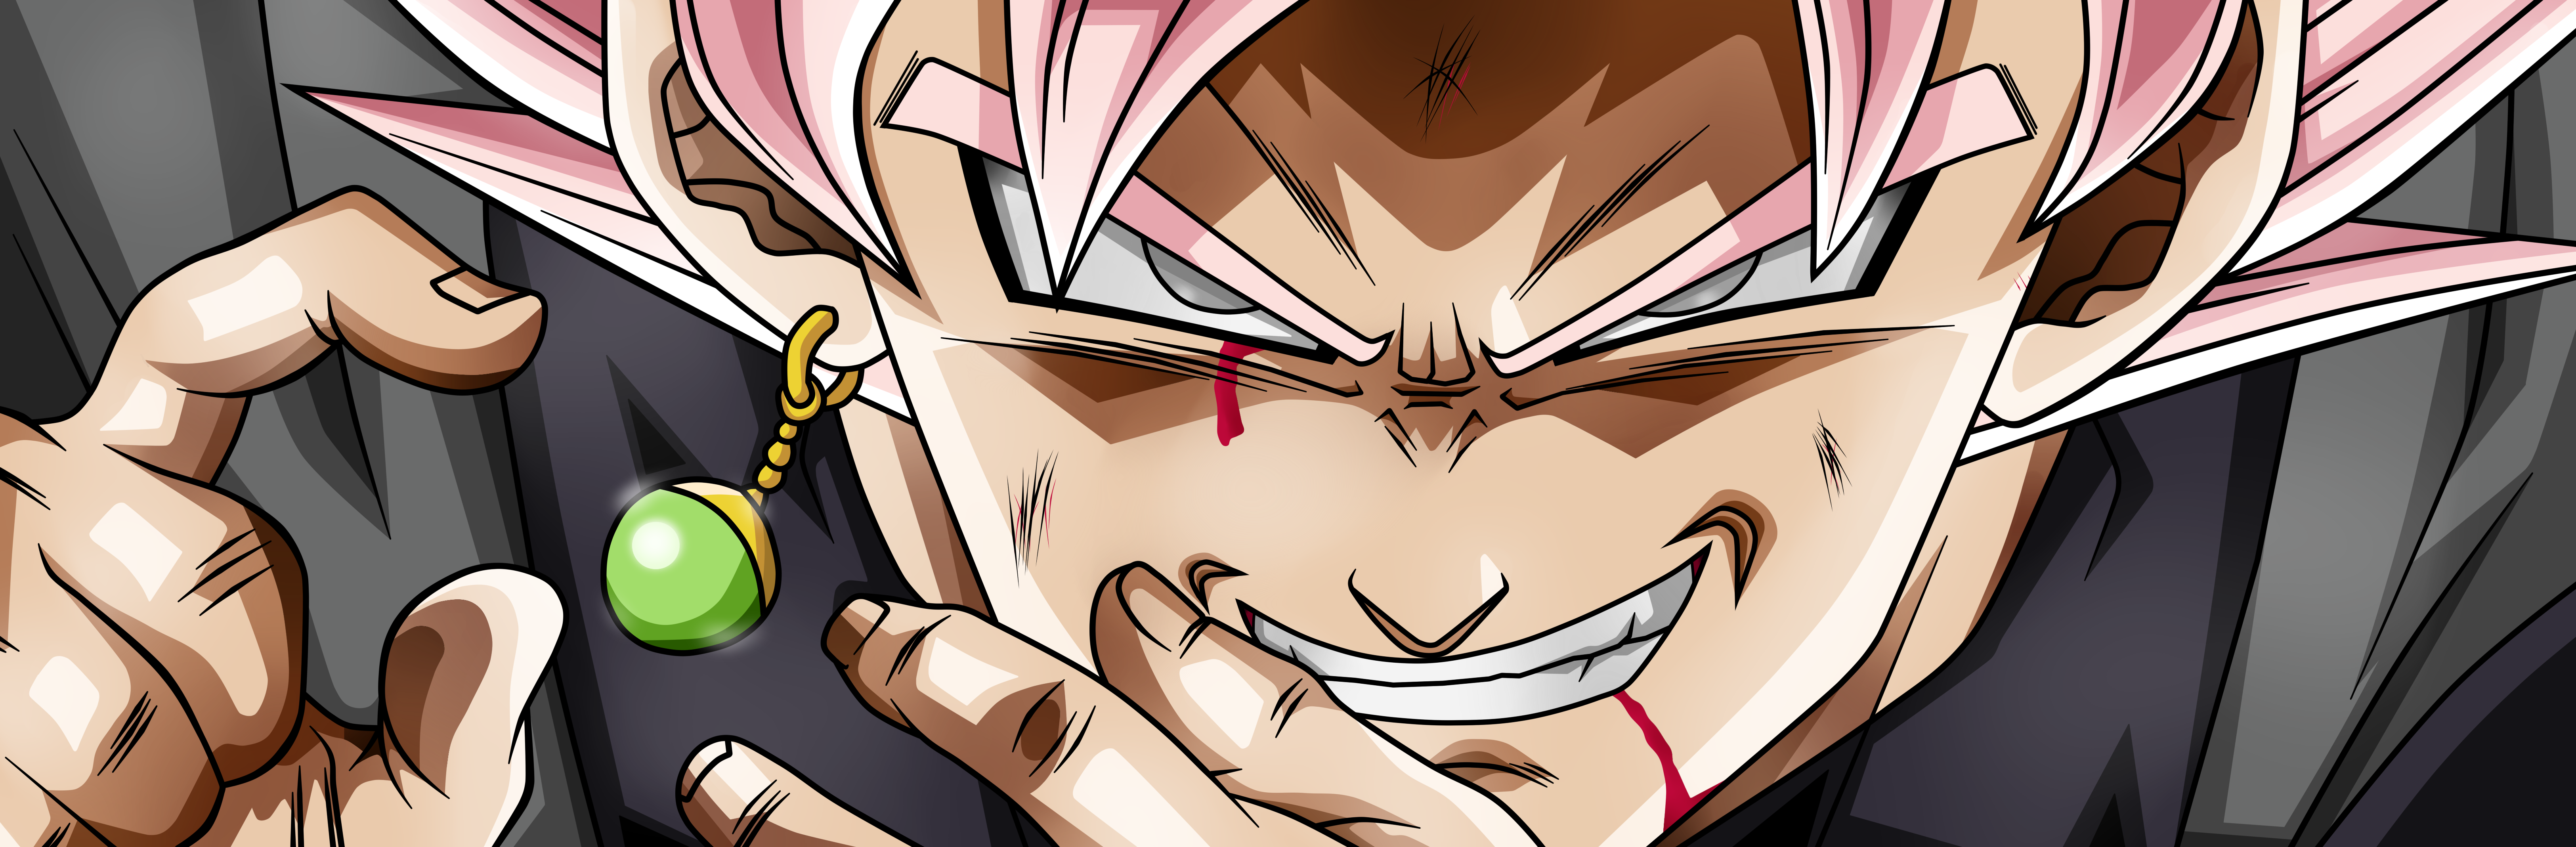 30+ Super Saiyan Rosé HD Wallpapers and Backgrounds